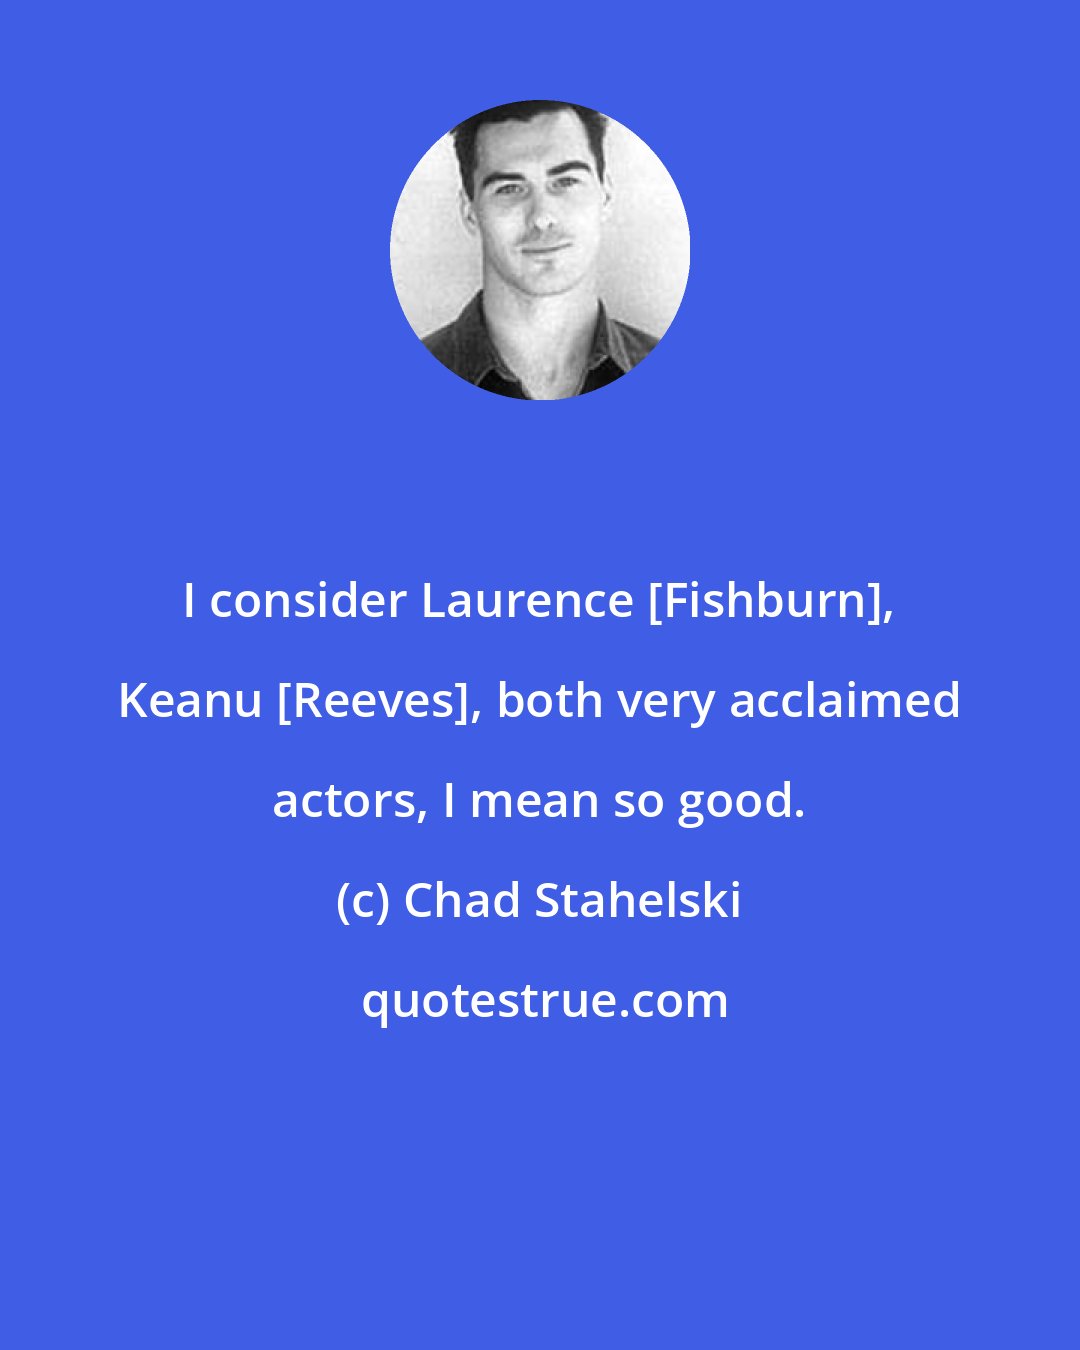 Chad Stahelski: I consider Laurence [Fishburn], Keanu [Reeves], both very acclaimed actors, I mean so good.